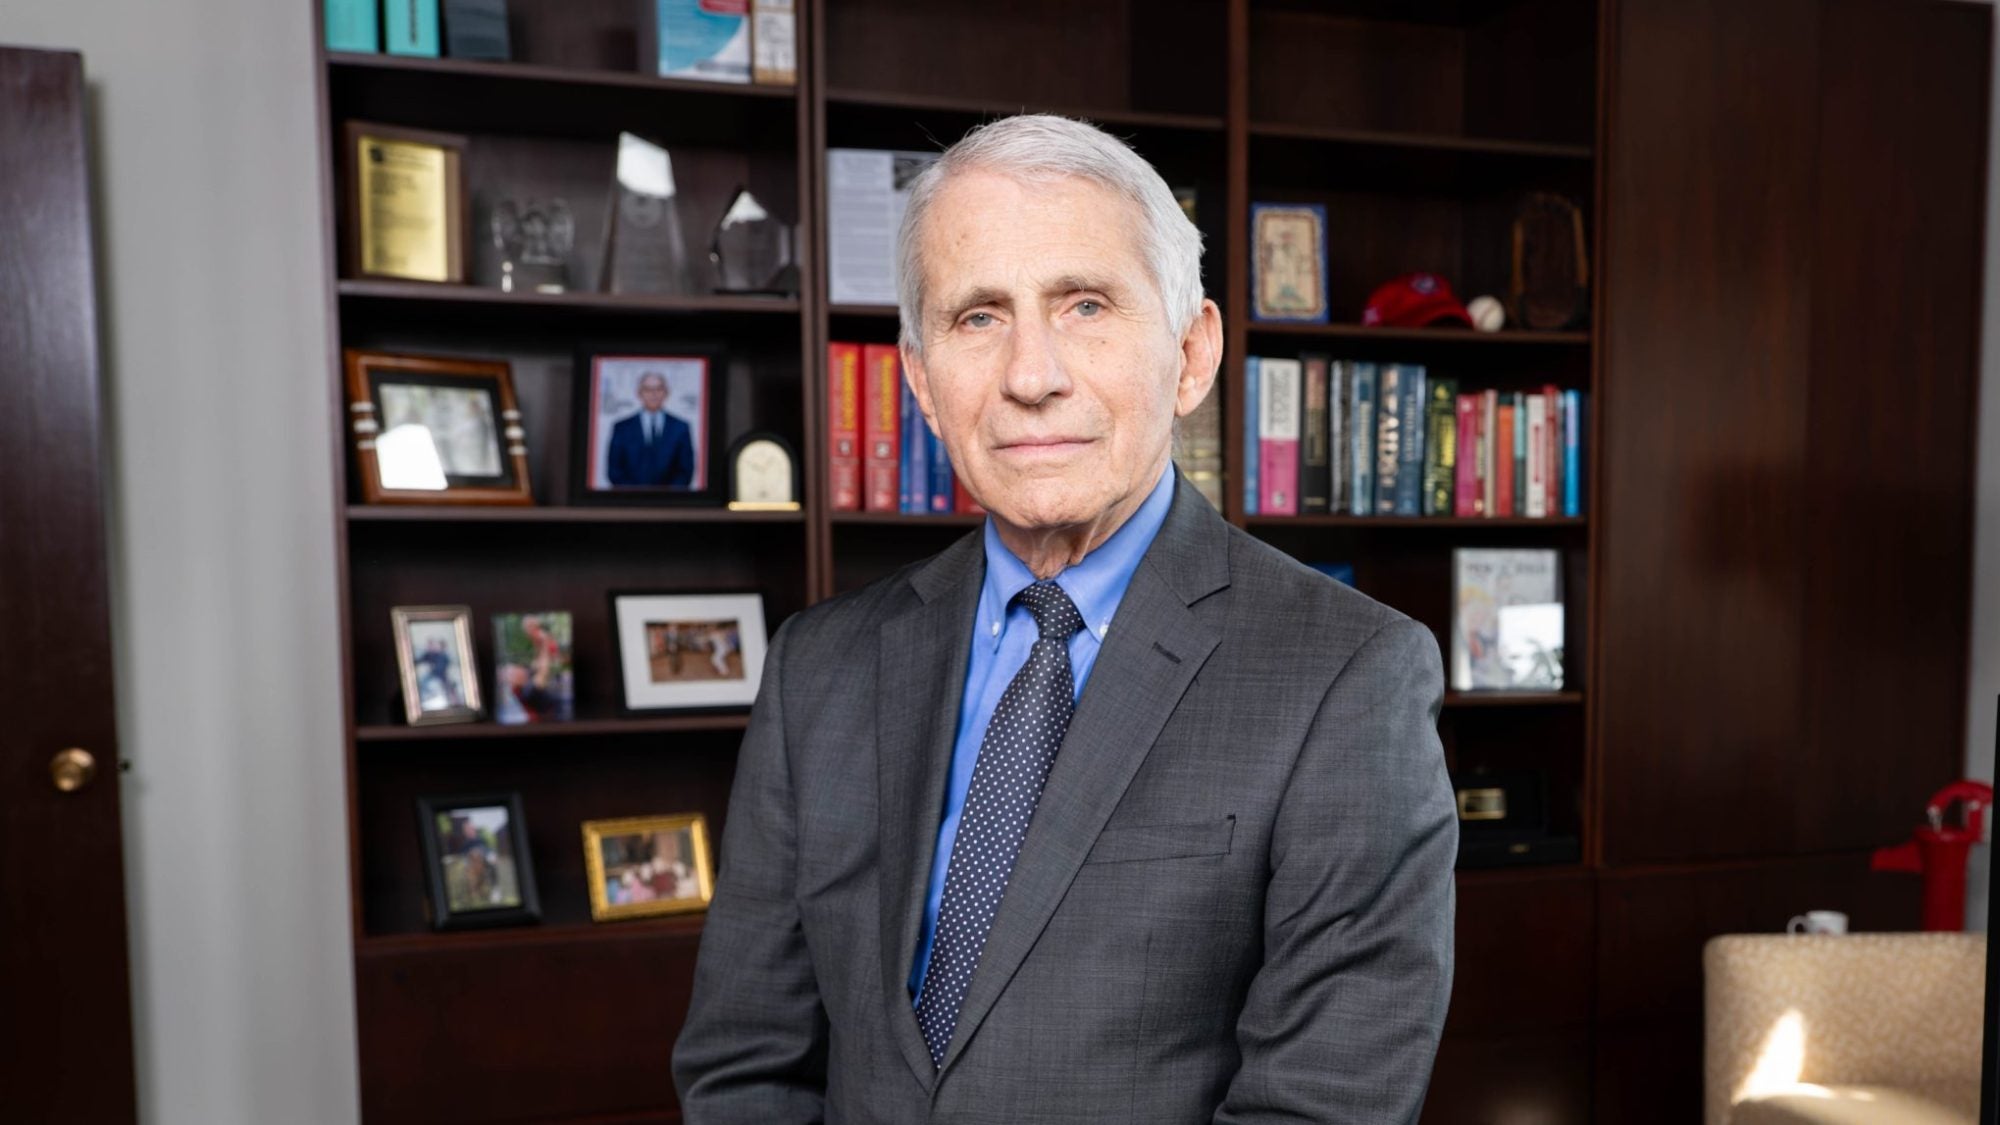 Dr. Fauci leaning on a desk witth a bookcase behind him while wearing a grey suit and tie.